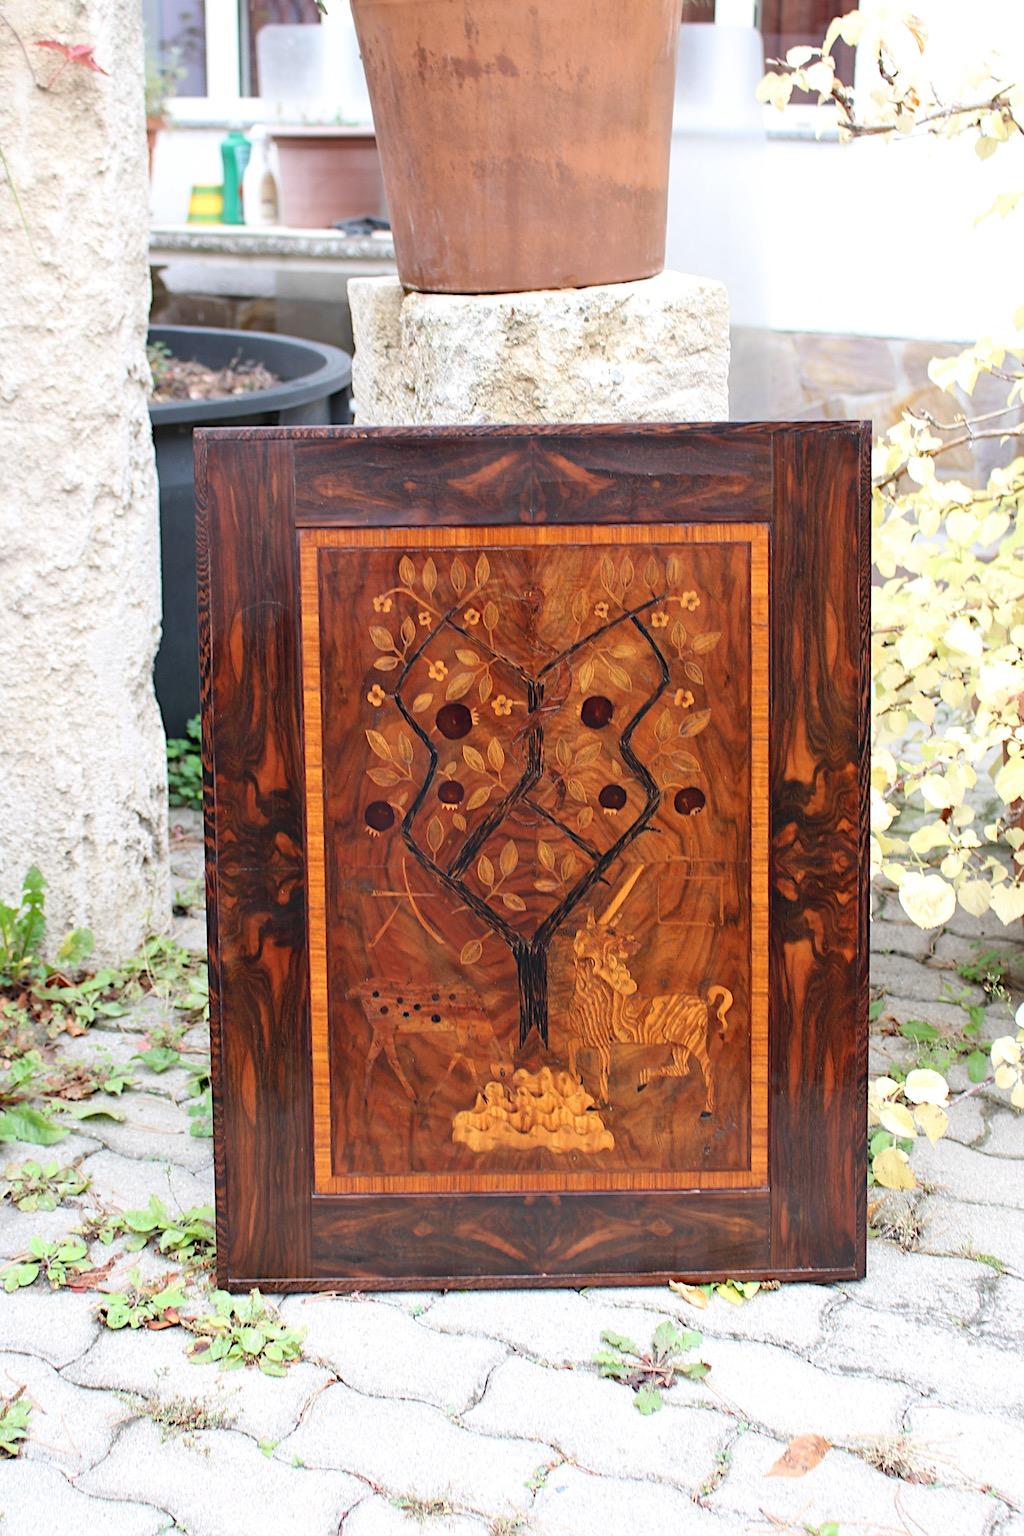 Art Deco Wood Inlaid Picture Unicorn Pomegranate Tree 1920s Style Victor Lurje For Sale 11